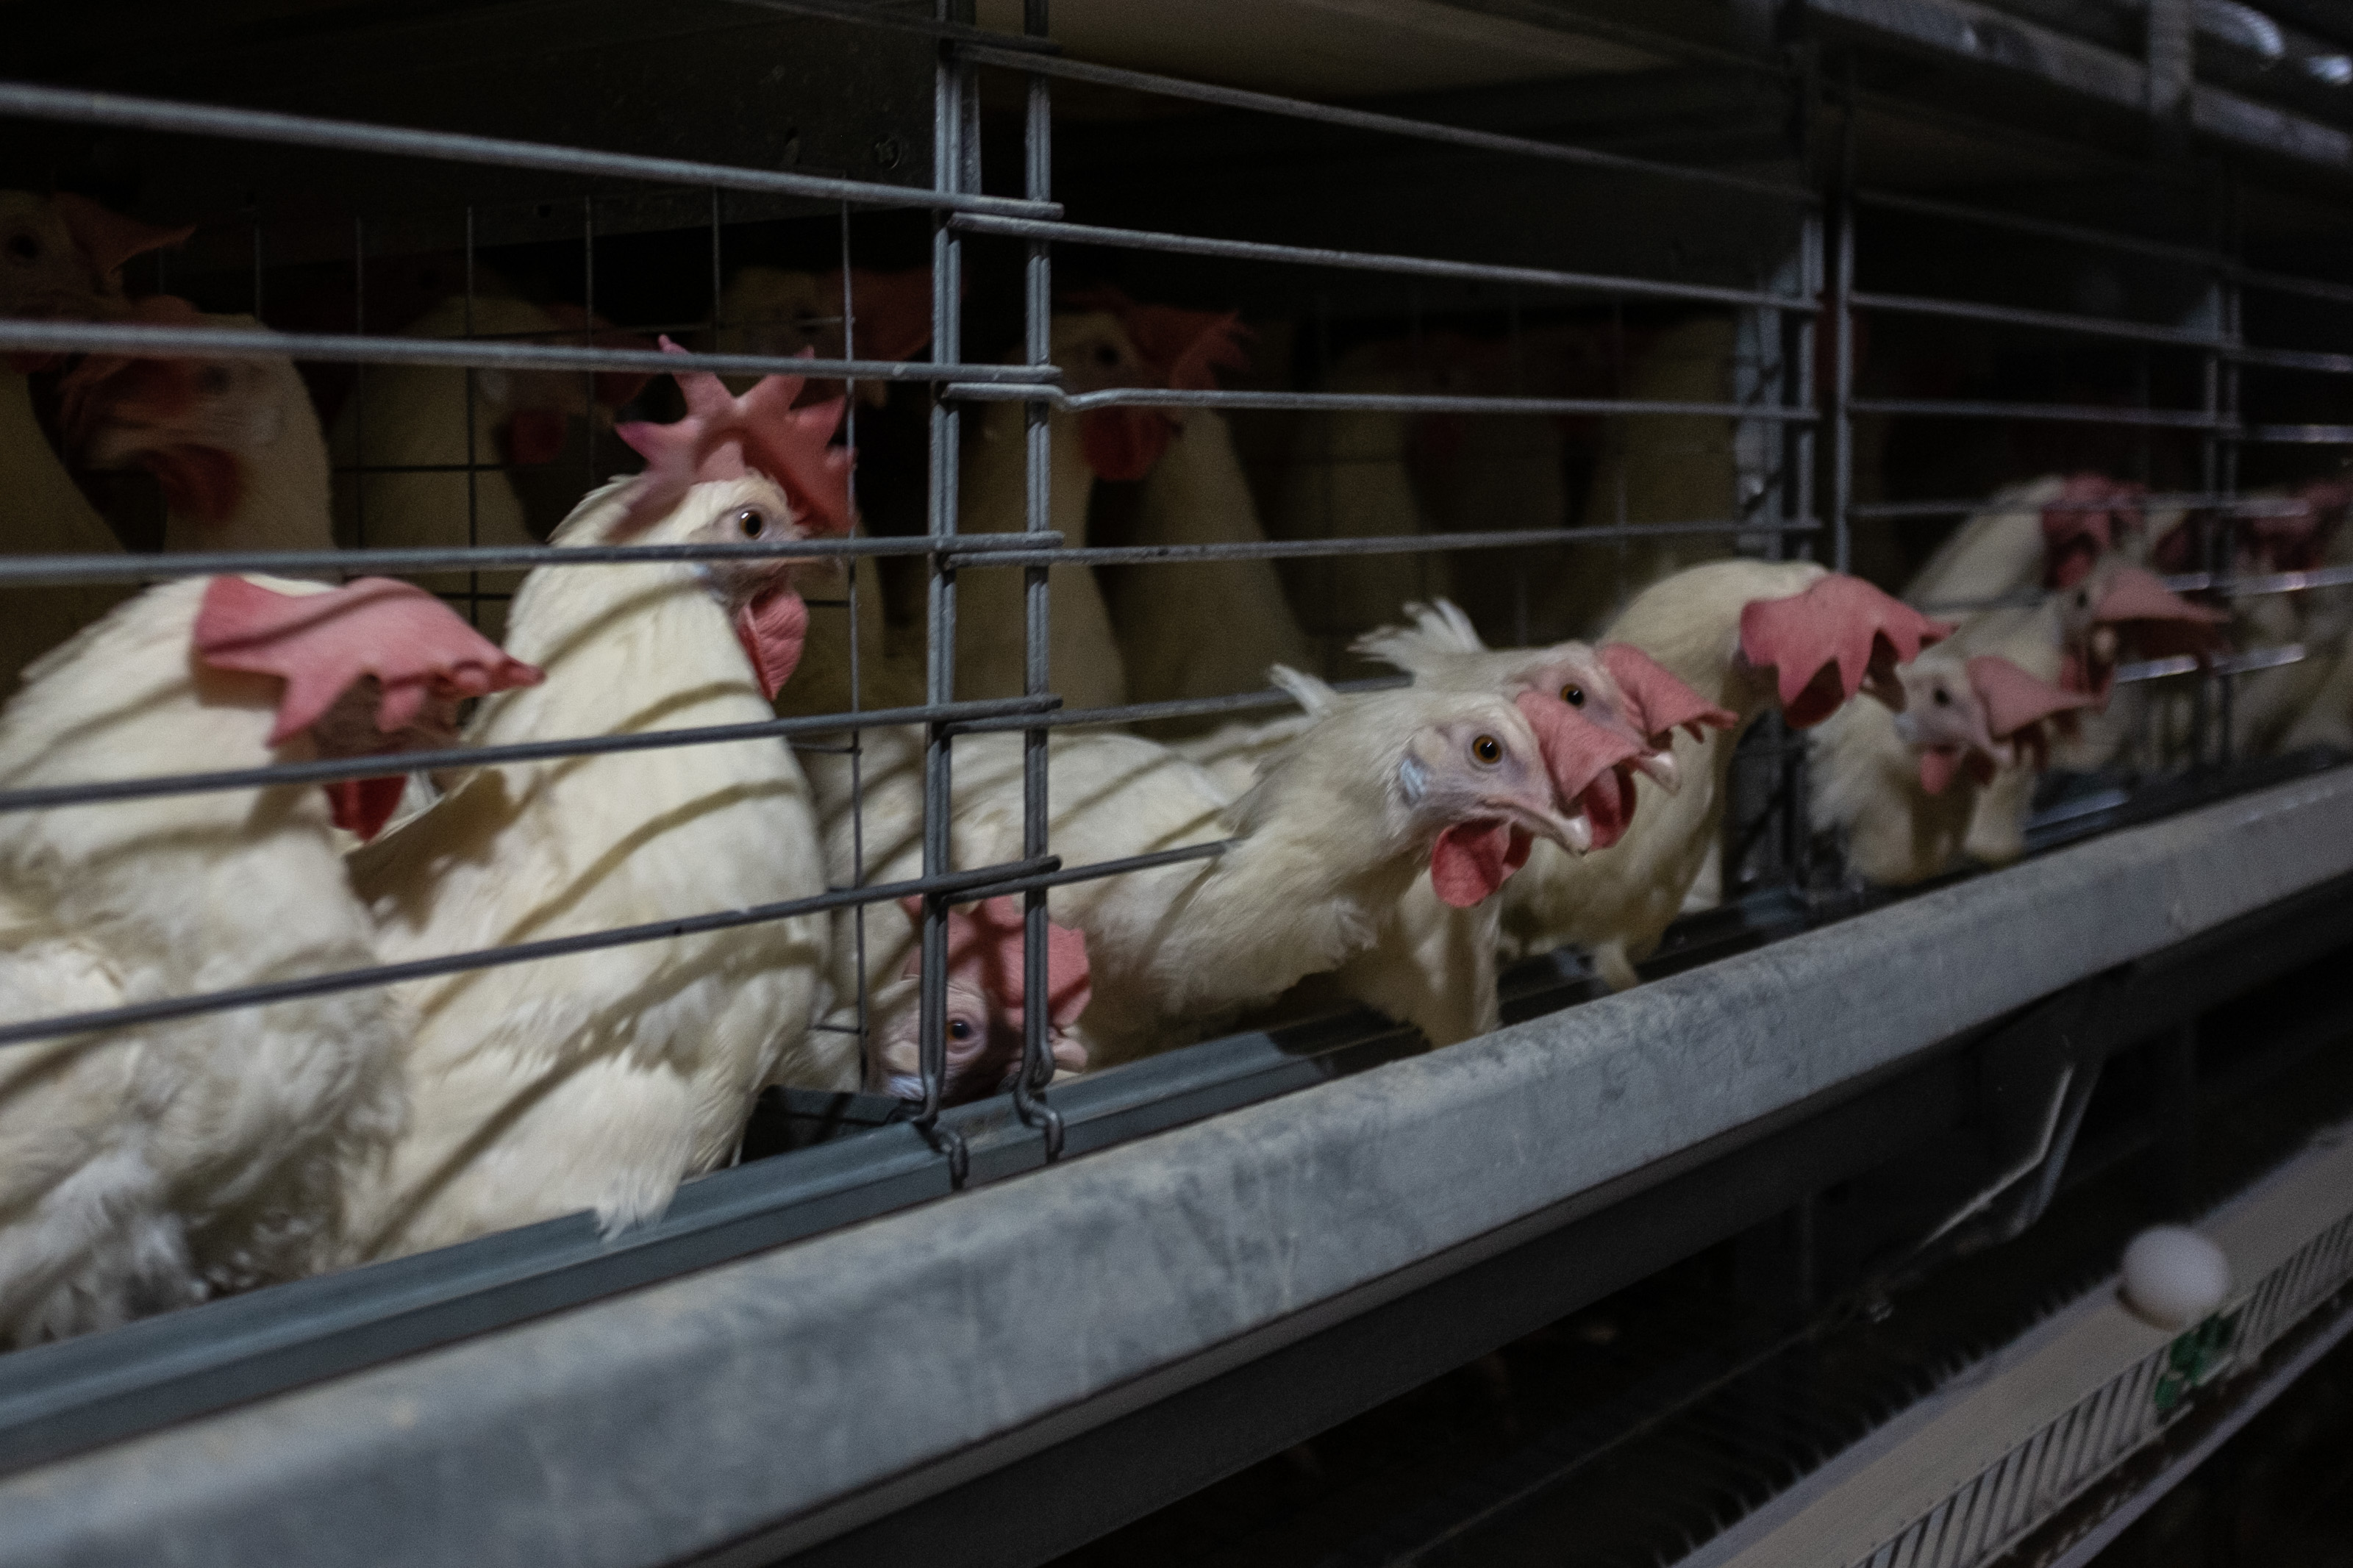 Hens are seen poking their heads out of the bars of battery cages.